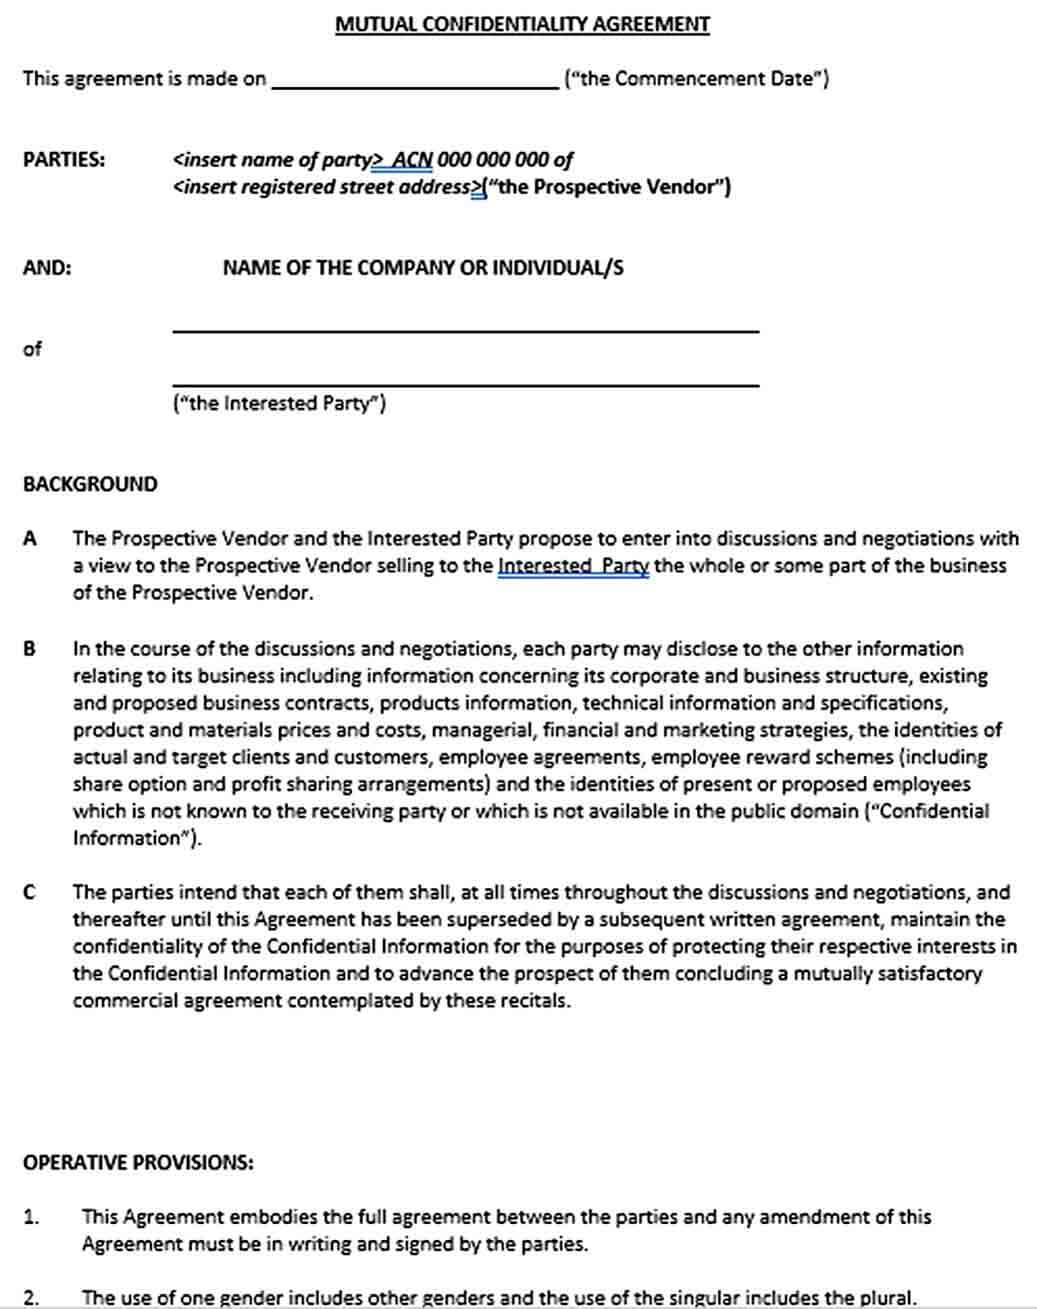 Sample Mutual Basic Confidentiality Agreement